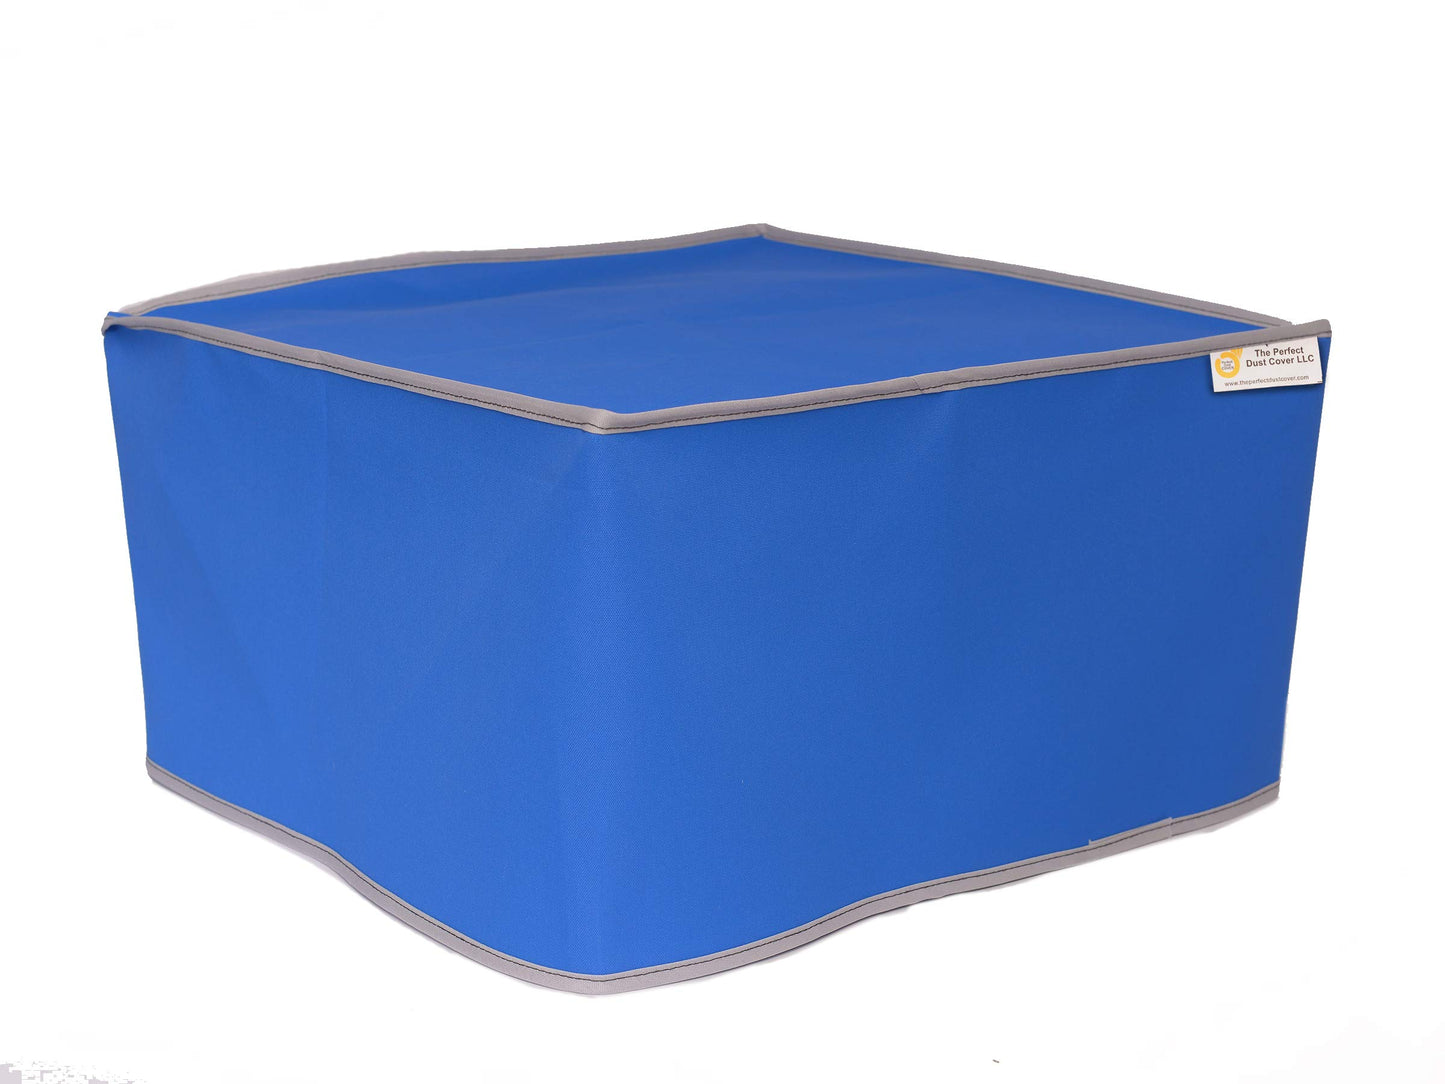 The Perfect Dust Cover, Royal Blue Nylon Cover for Oster Stainless Steel Convection Oven with Pizza Drawer Model TSSTTVPZDS, Anti Static, Double Stitched and Waterproof by The Perfect Dust Cover LLC